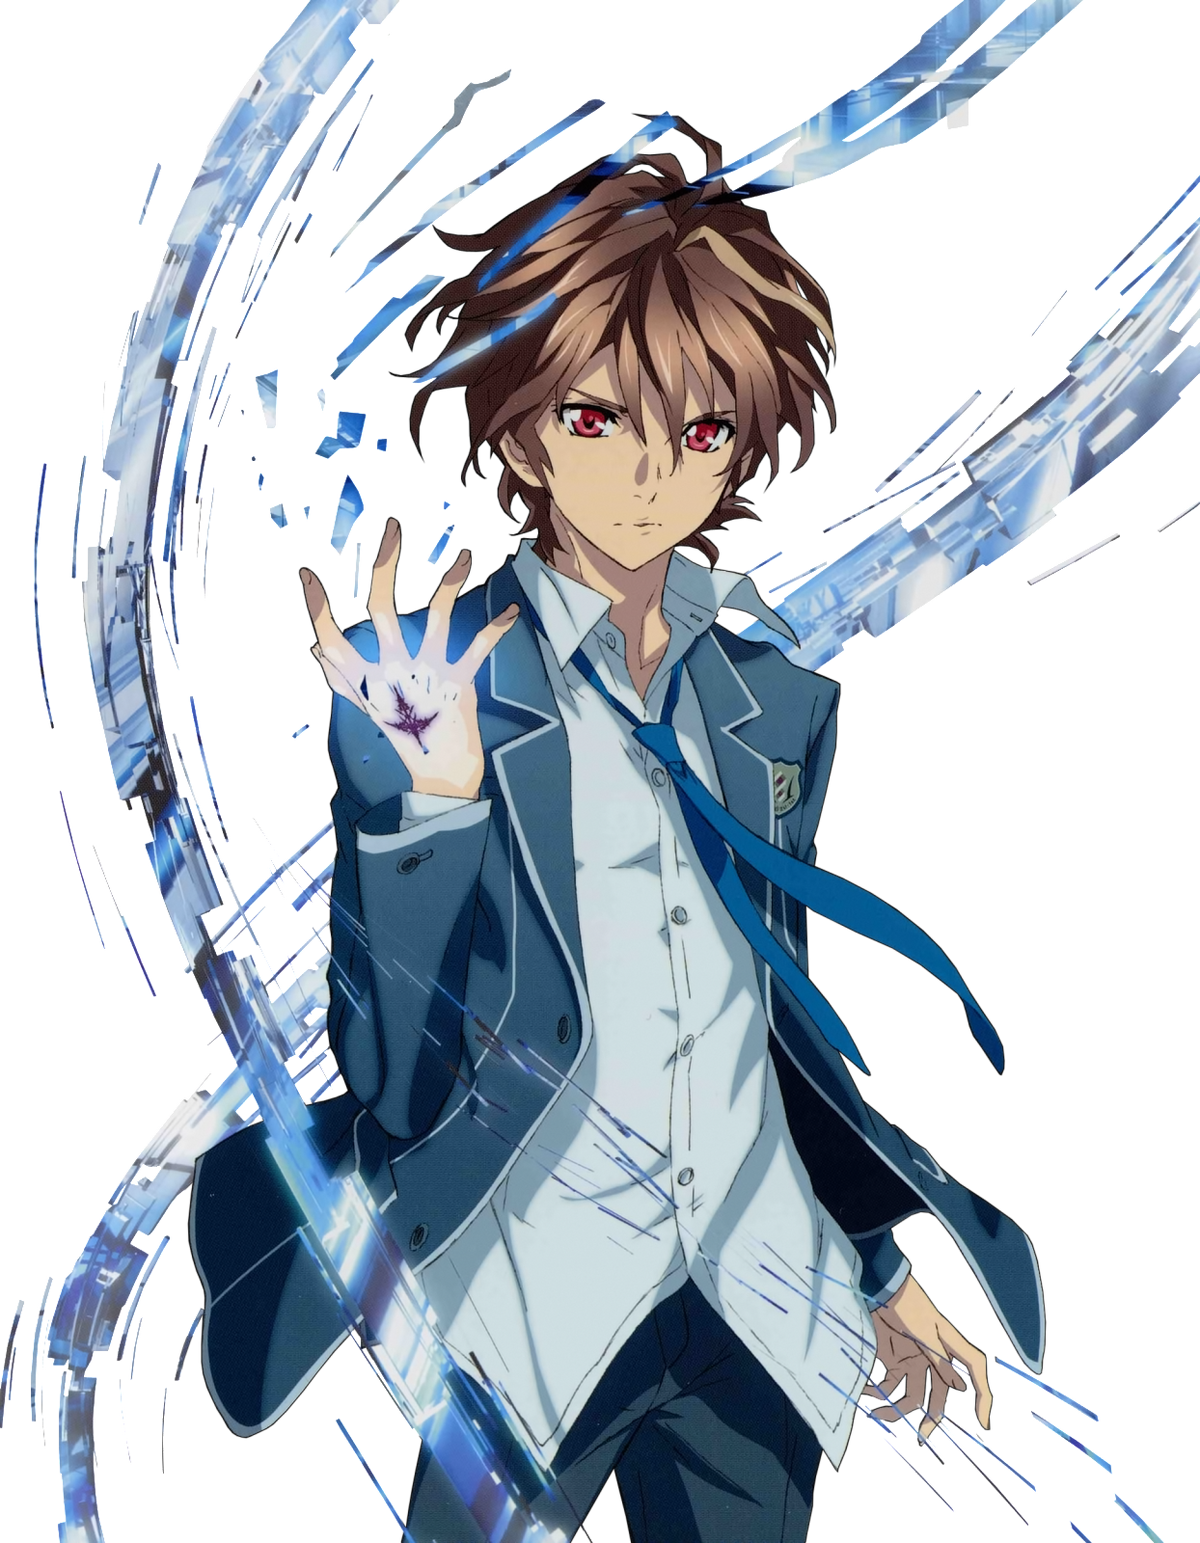 List of Guilty Crown characters - Wikipedia